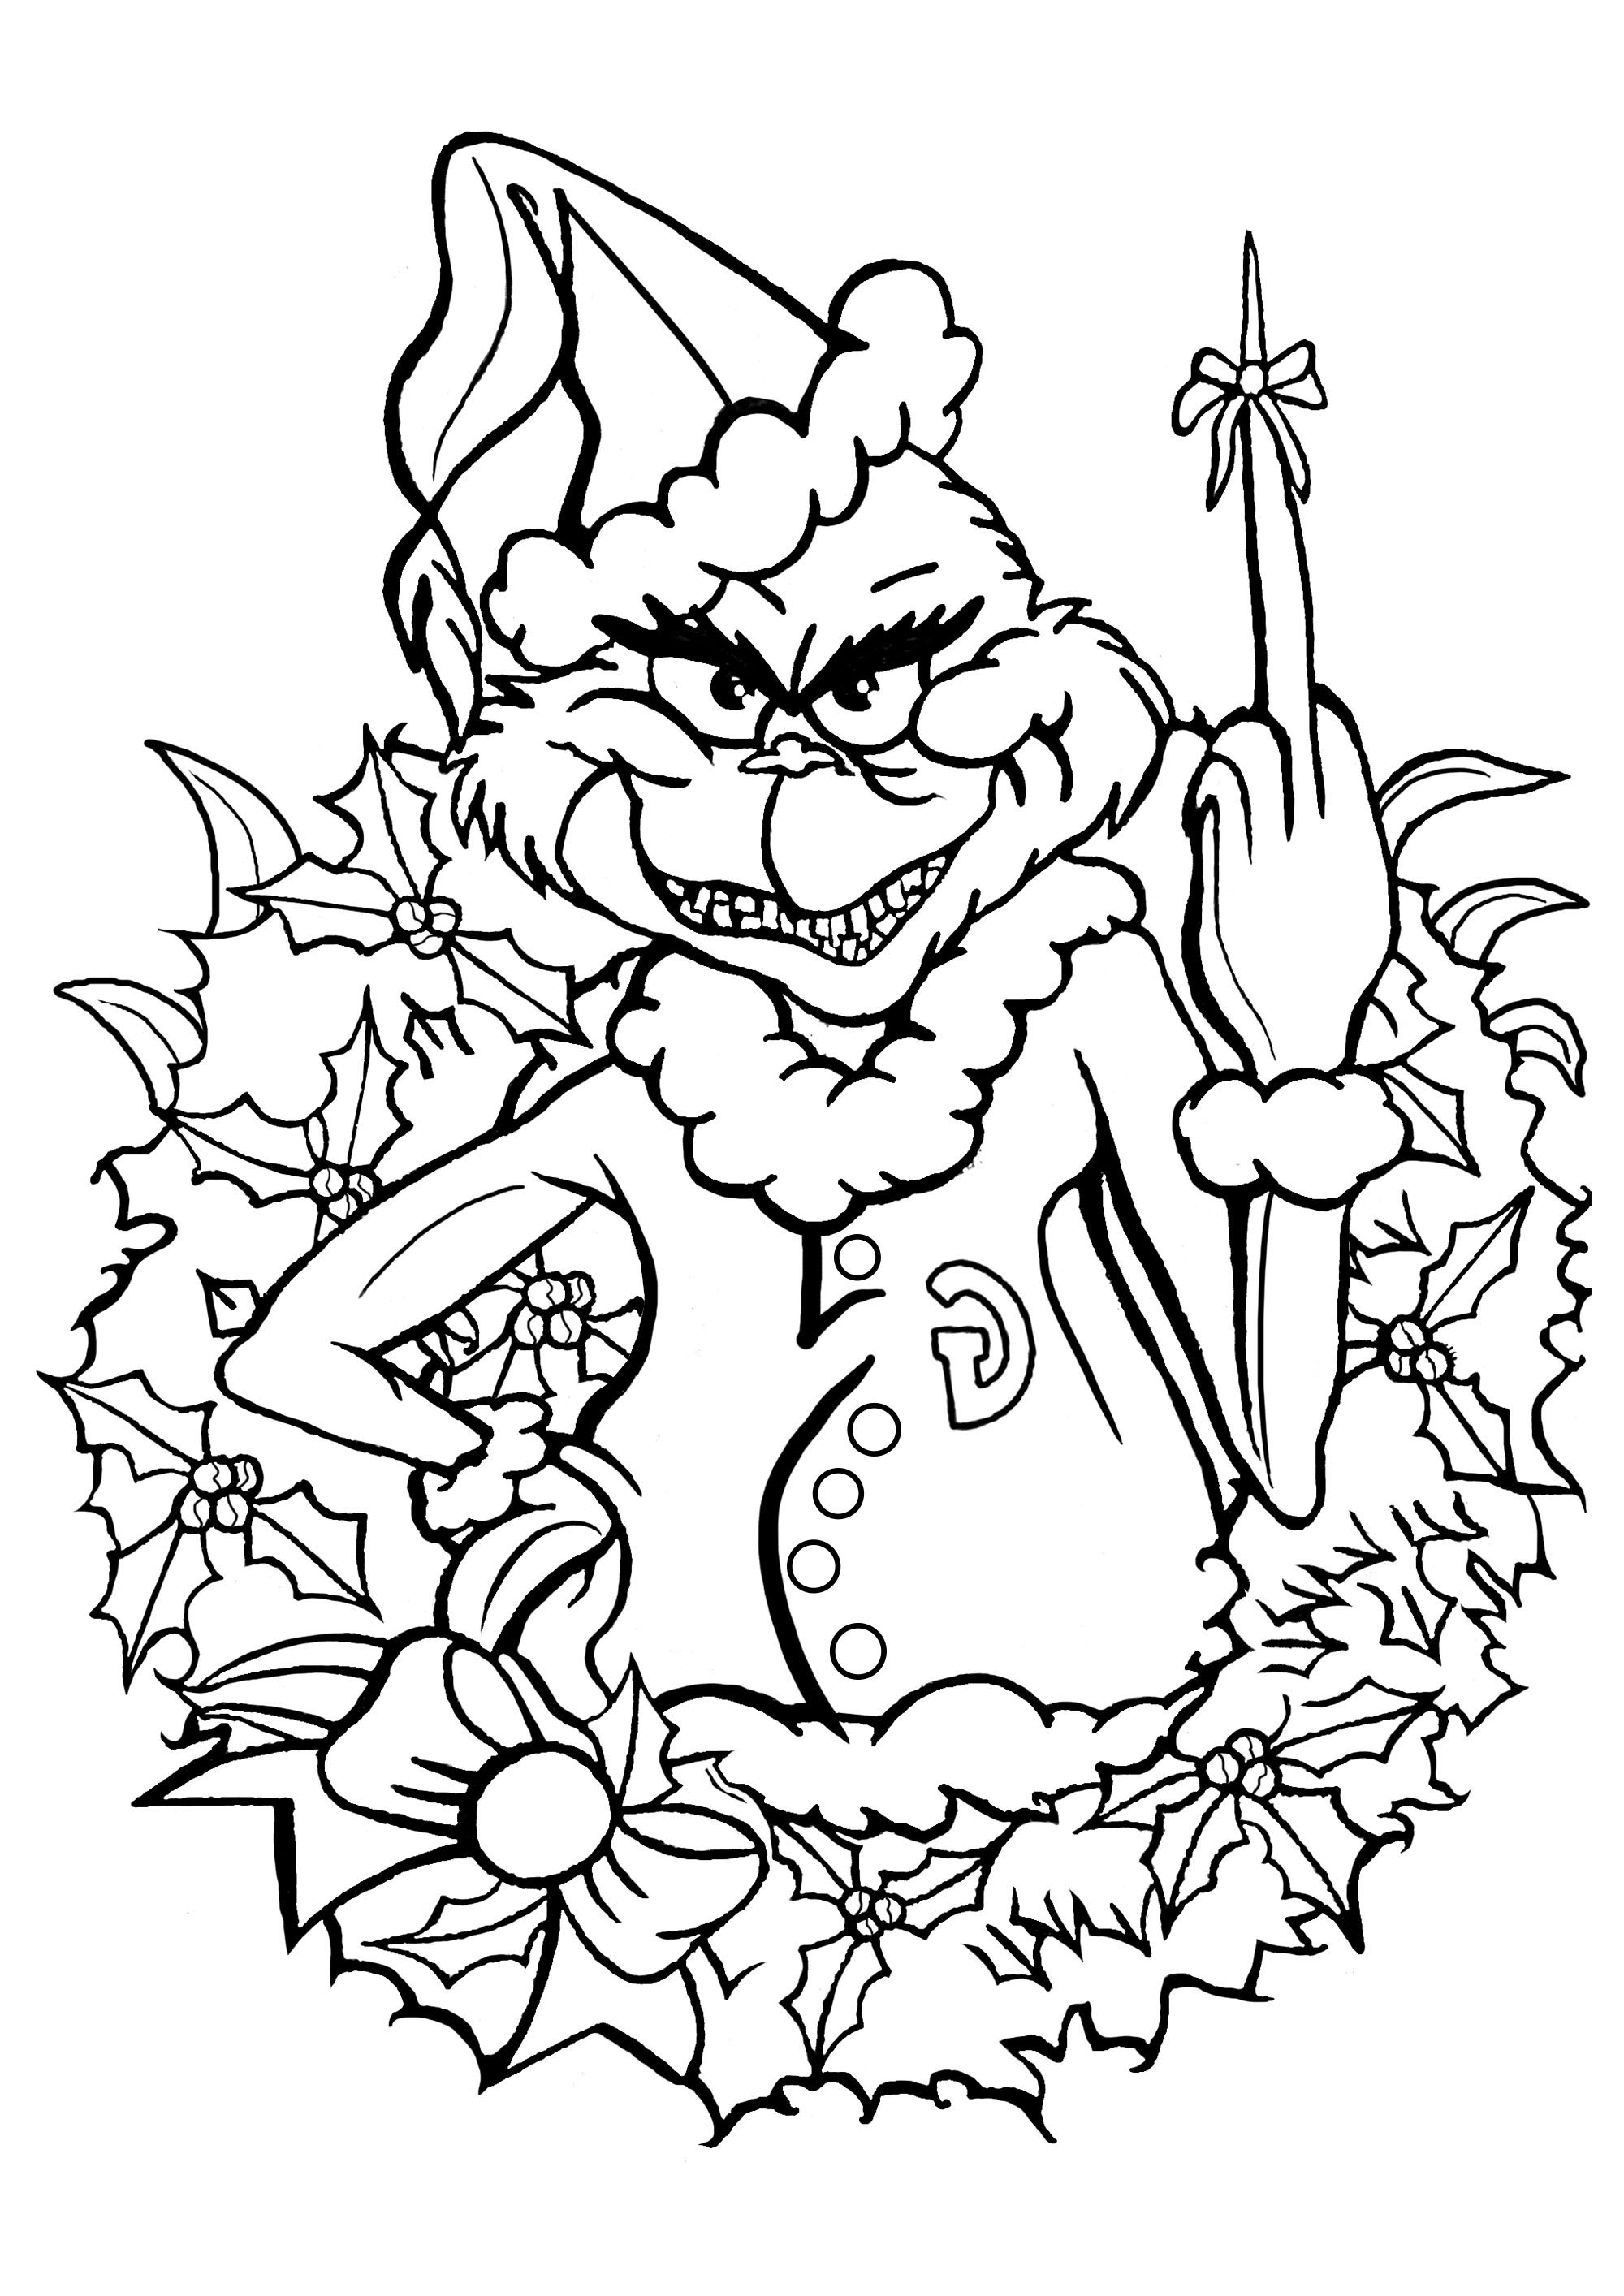 the-grinch-printable-coloring-pages-printable-world-holiday